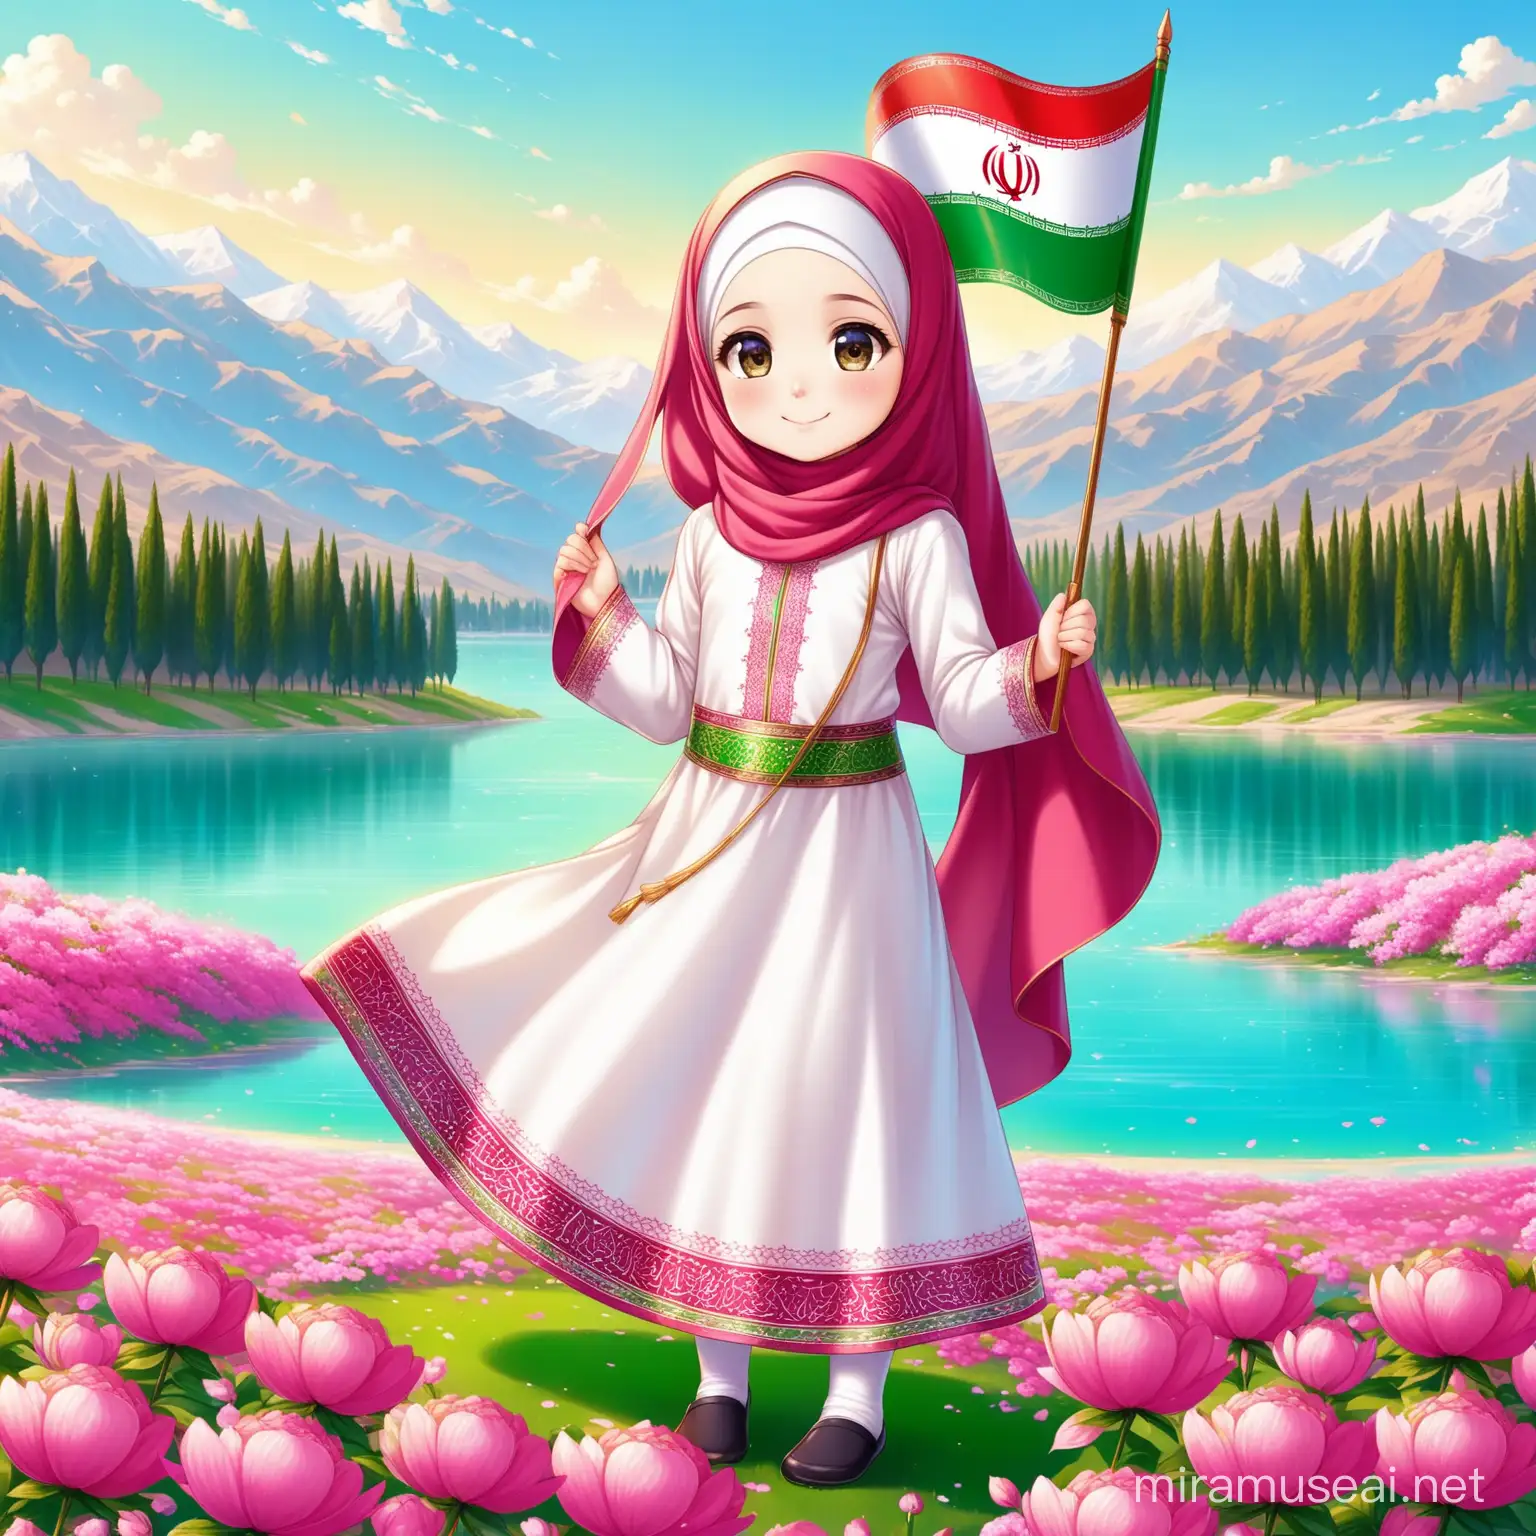 Persian little girl(full height, Muslim, with emphasis no hair out of veil(Hijab), small eyes, bigger nose, white skin, cute, smiling, wearing socks, nice flag of Iran in hand with pride, clothes full of Persian designs).
Atmosphere full of many pink flowers, lake, sparing.